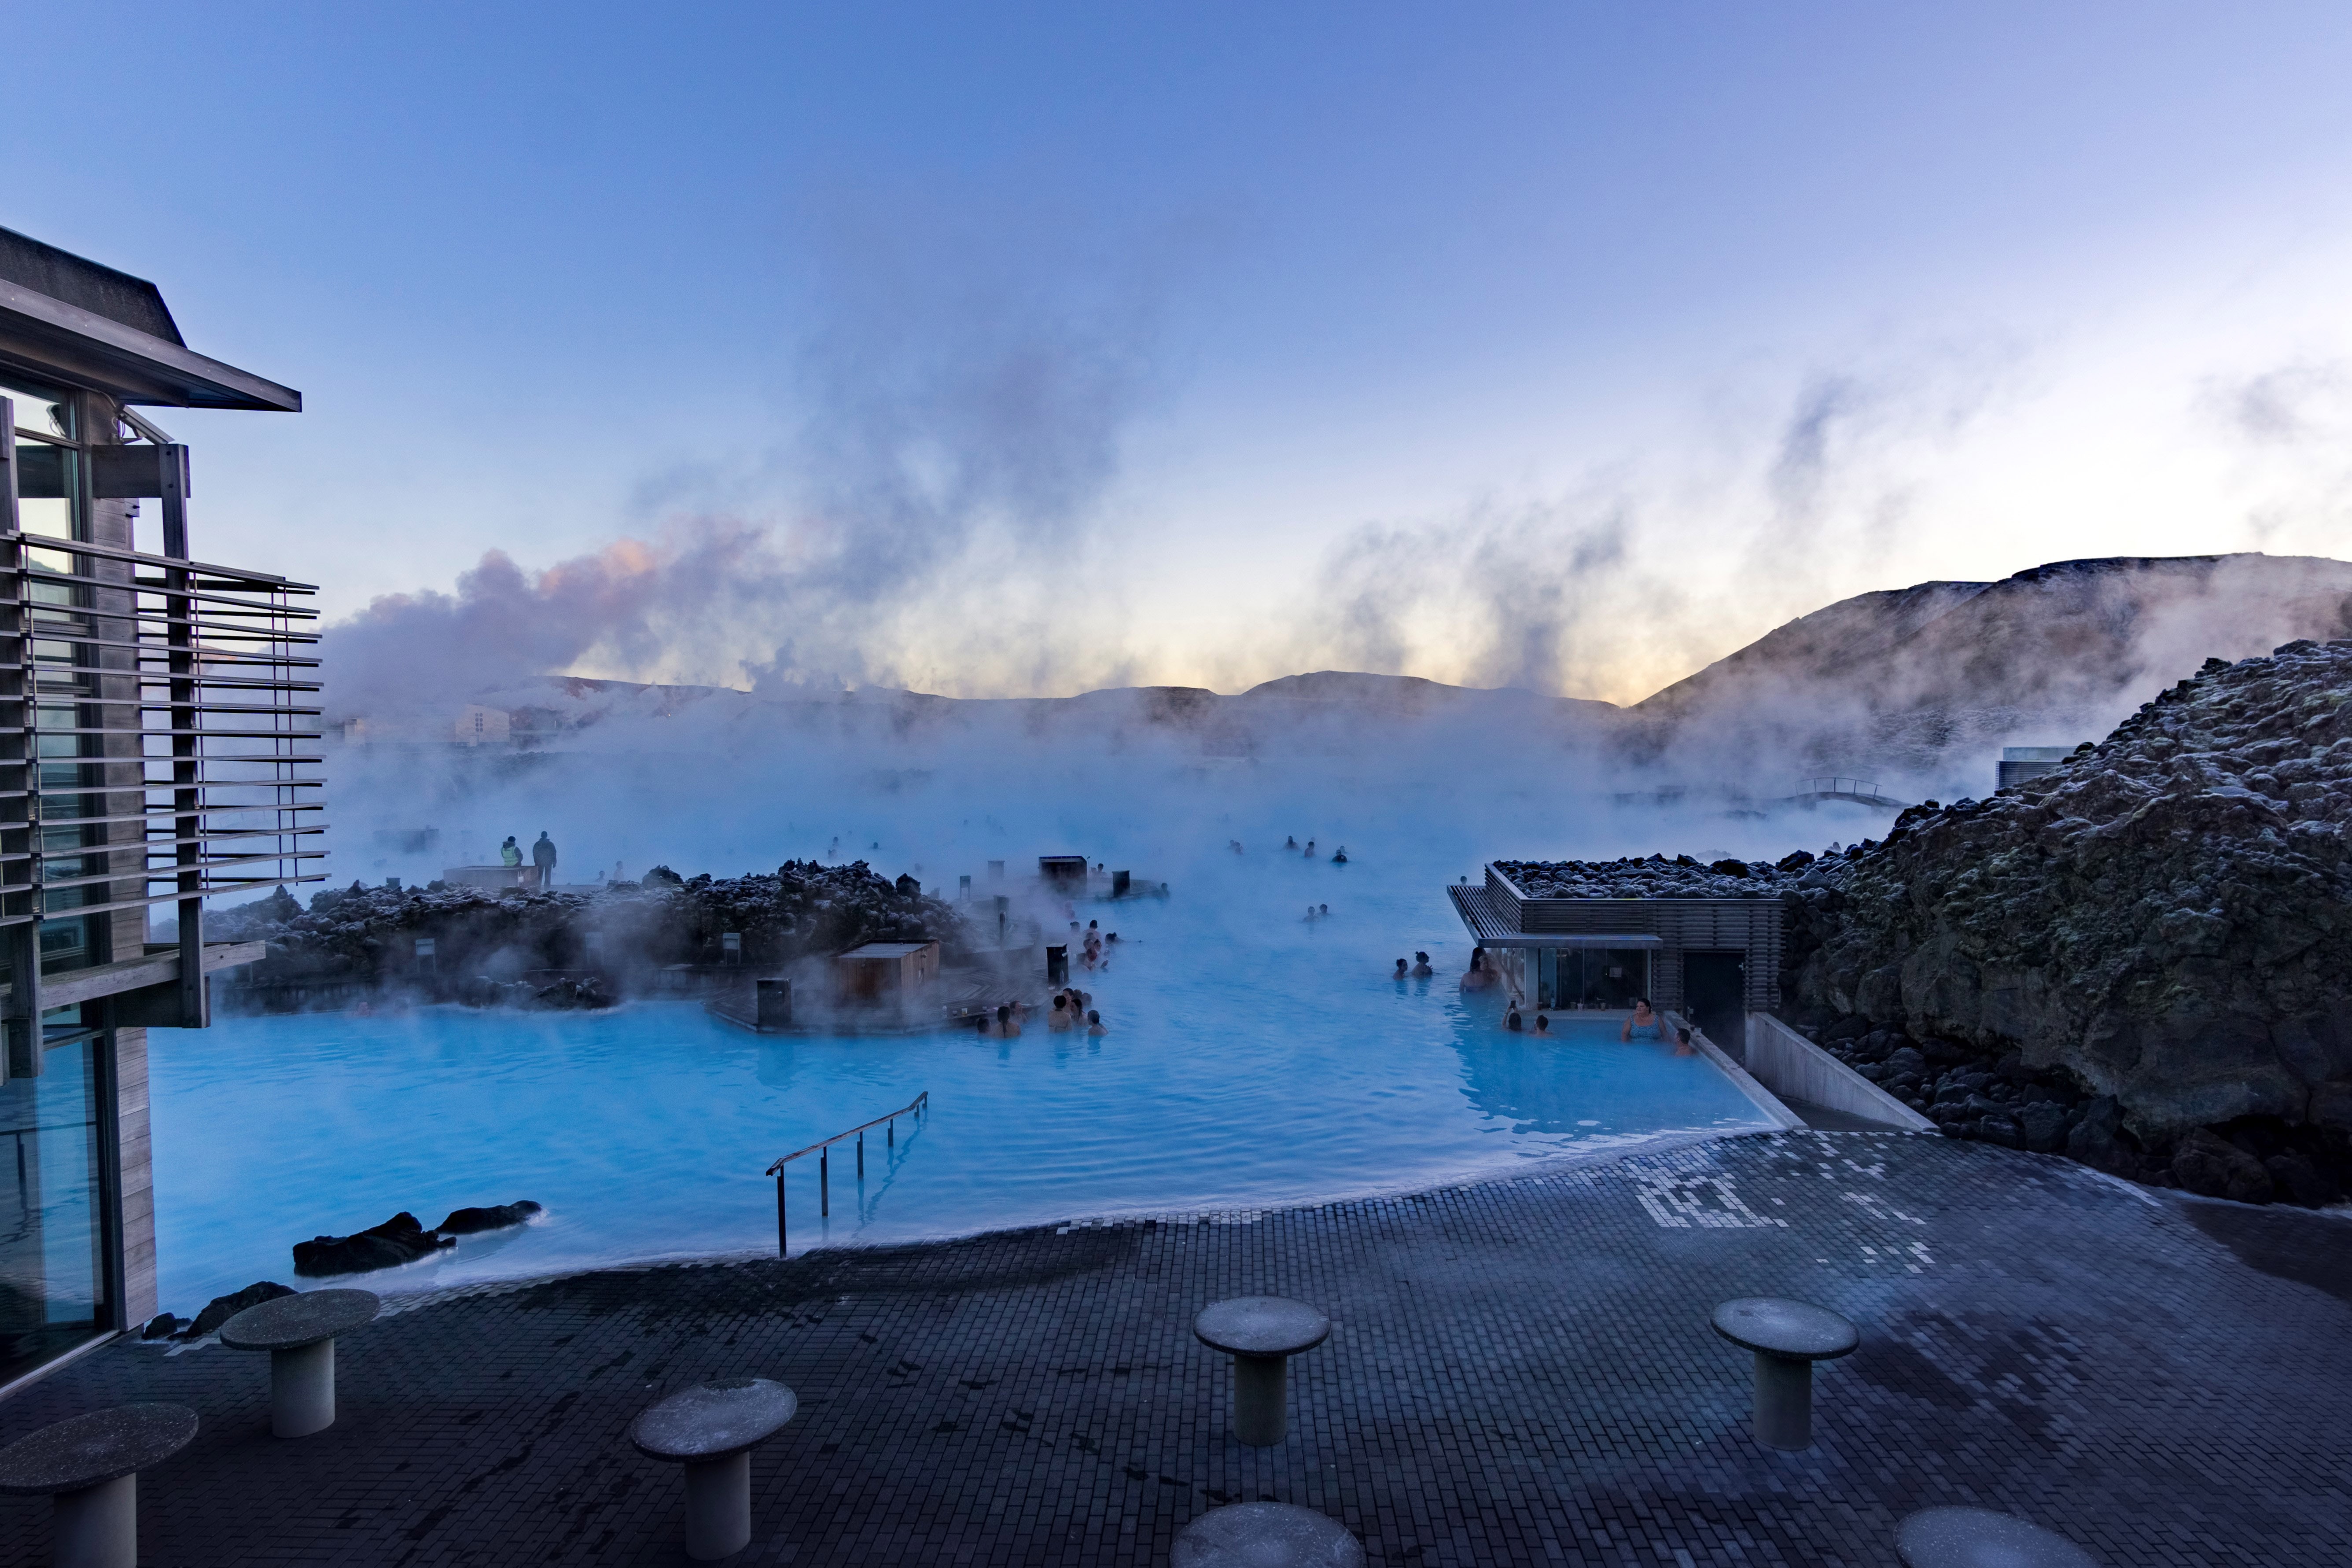 blue lagoon spa in Iceland
things to do in Reykjavik